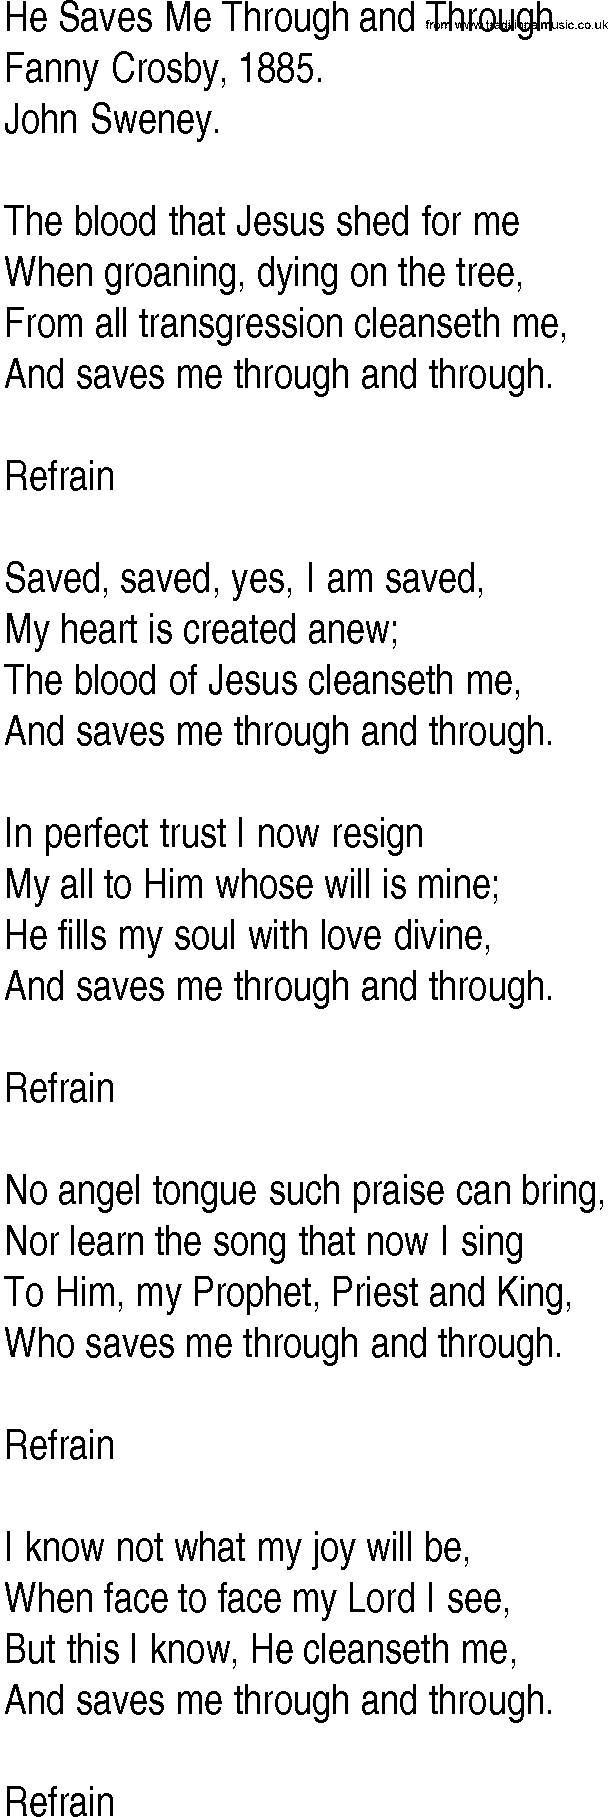 Hymn and Gospel Song: He Saves Me Through and Through by Fanny Crosby lyrics